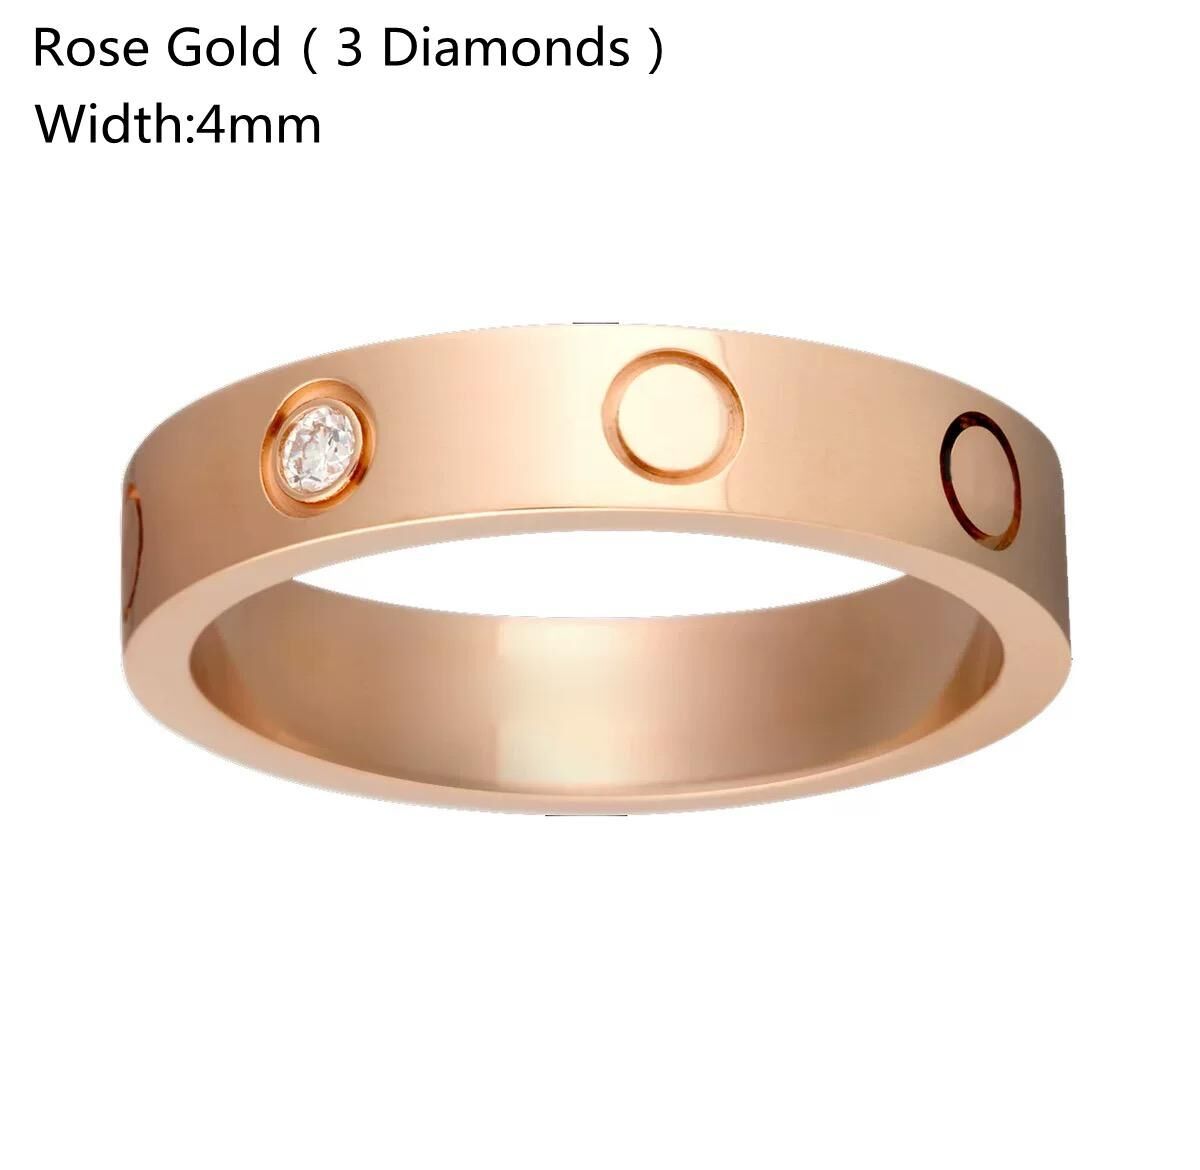 4mm rose gold with diamonds